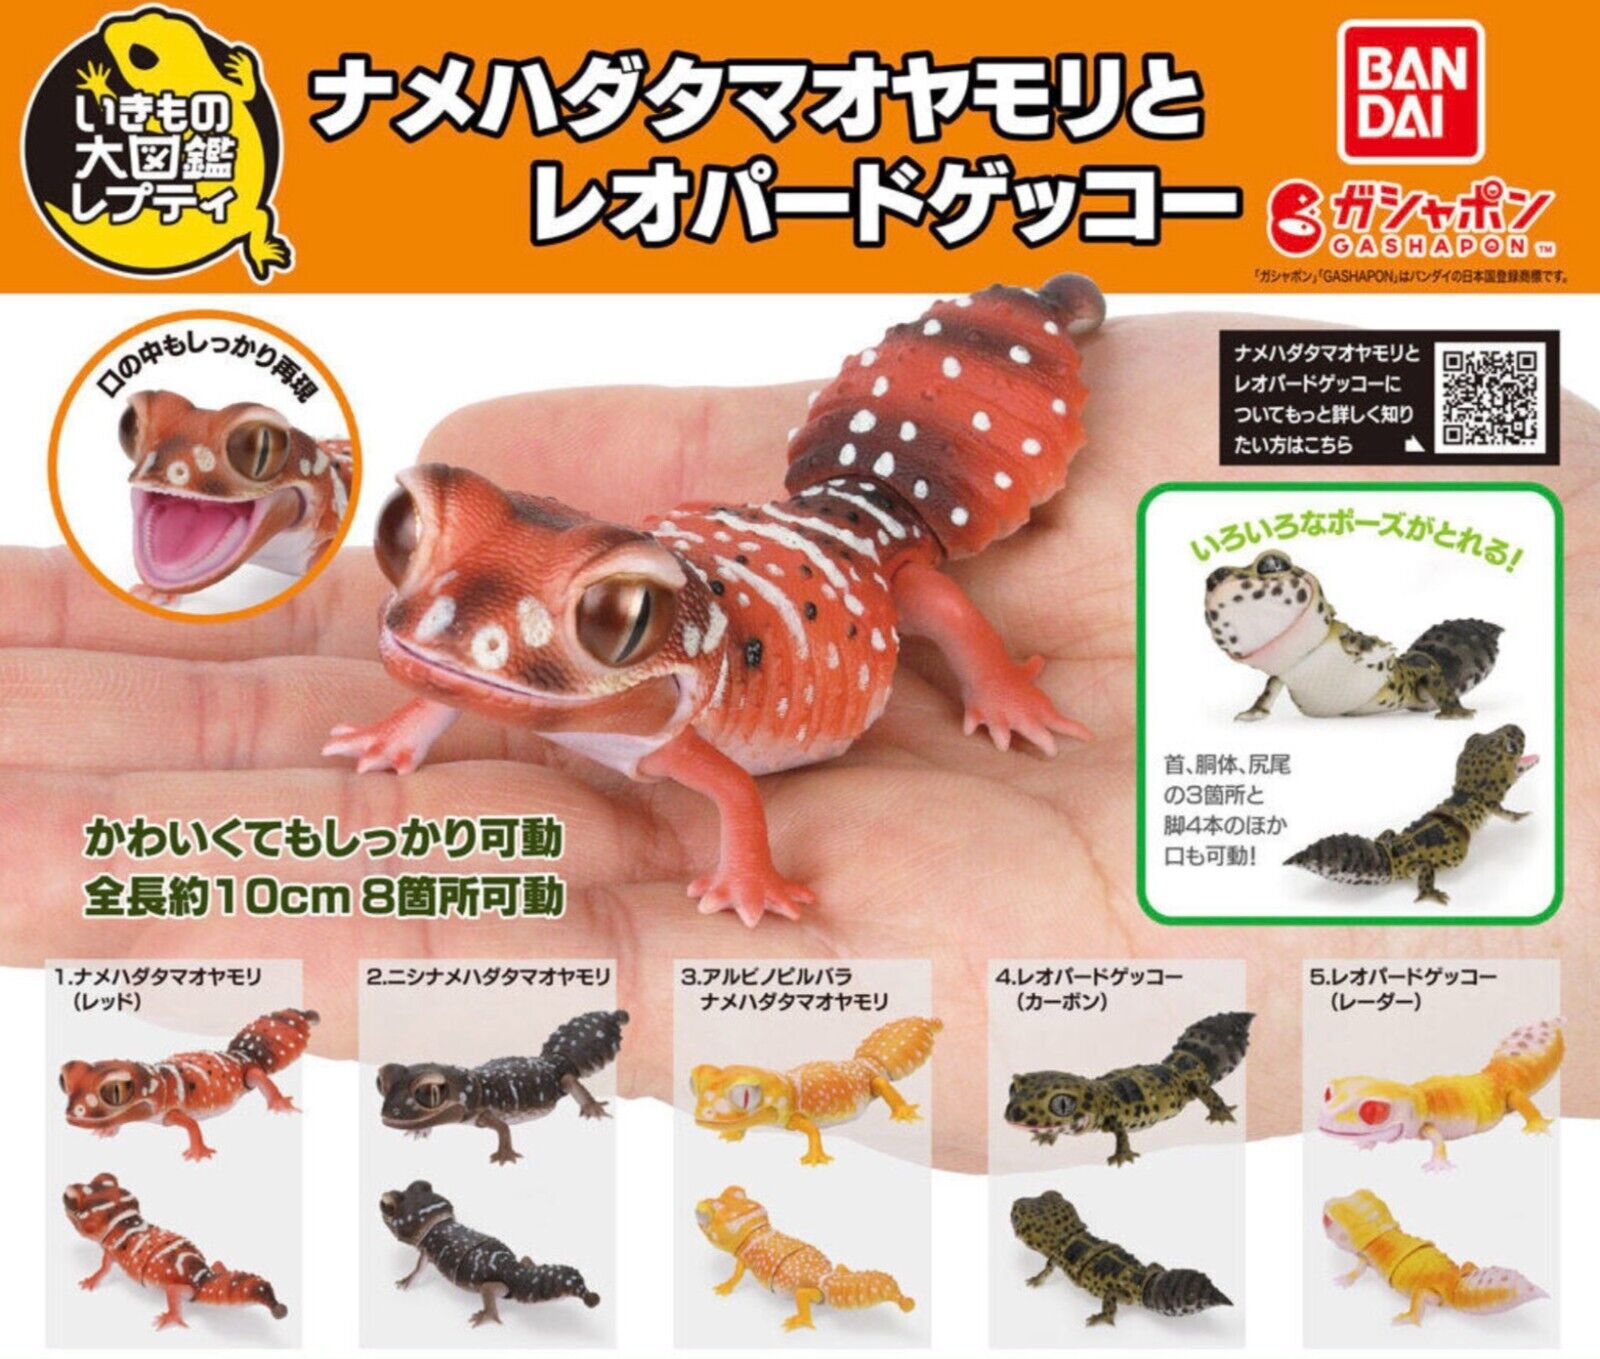 Bandai Gashapon Smooth knob-tailed & Leopard Gecko Action Figure Complete Set